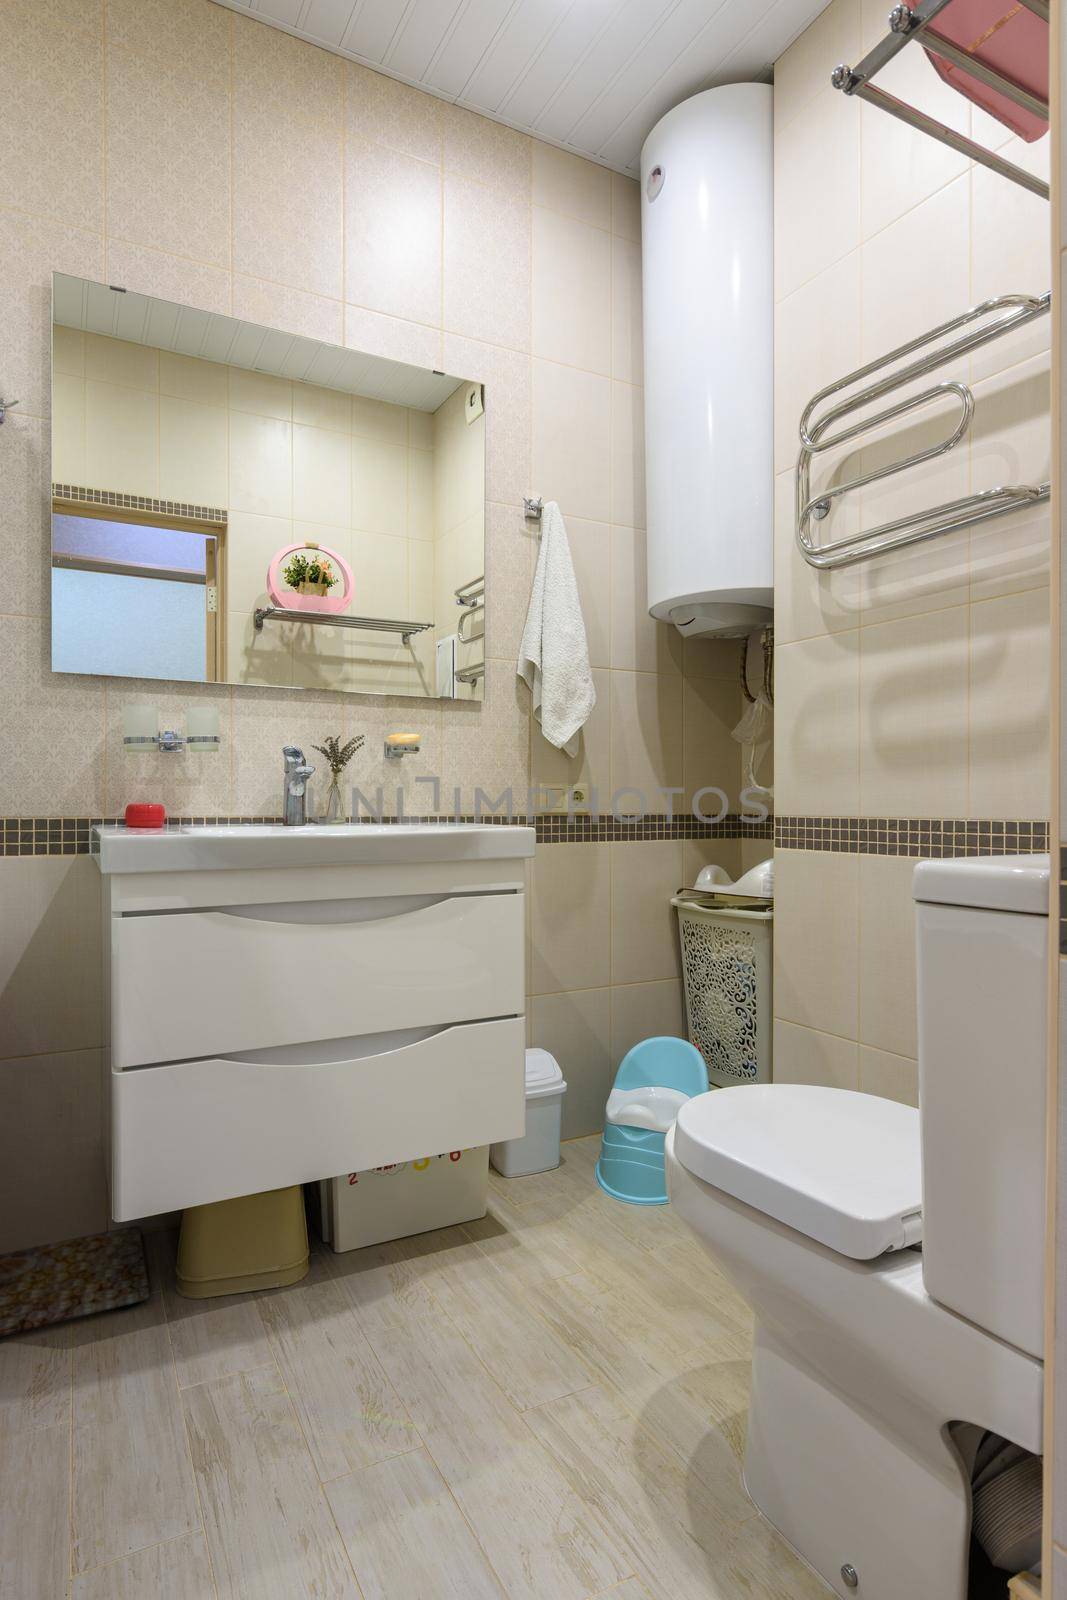 The interior of a compact toilet room in an apartment